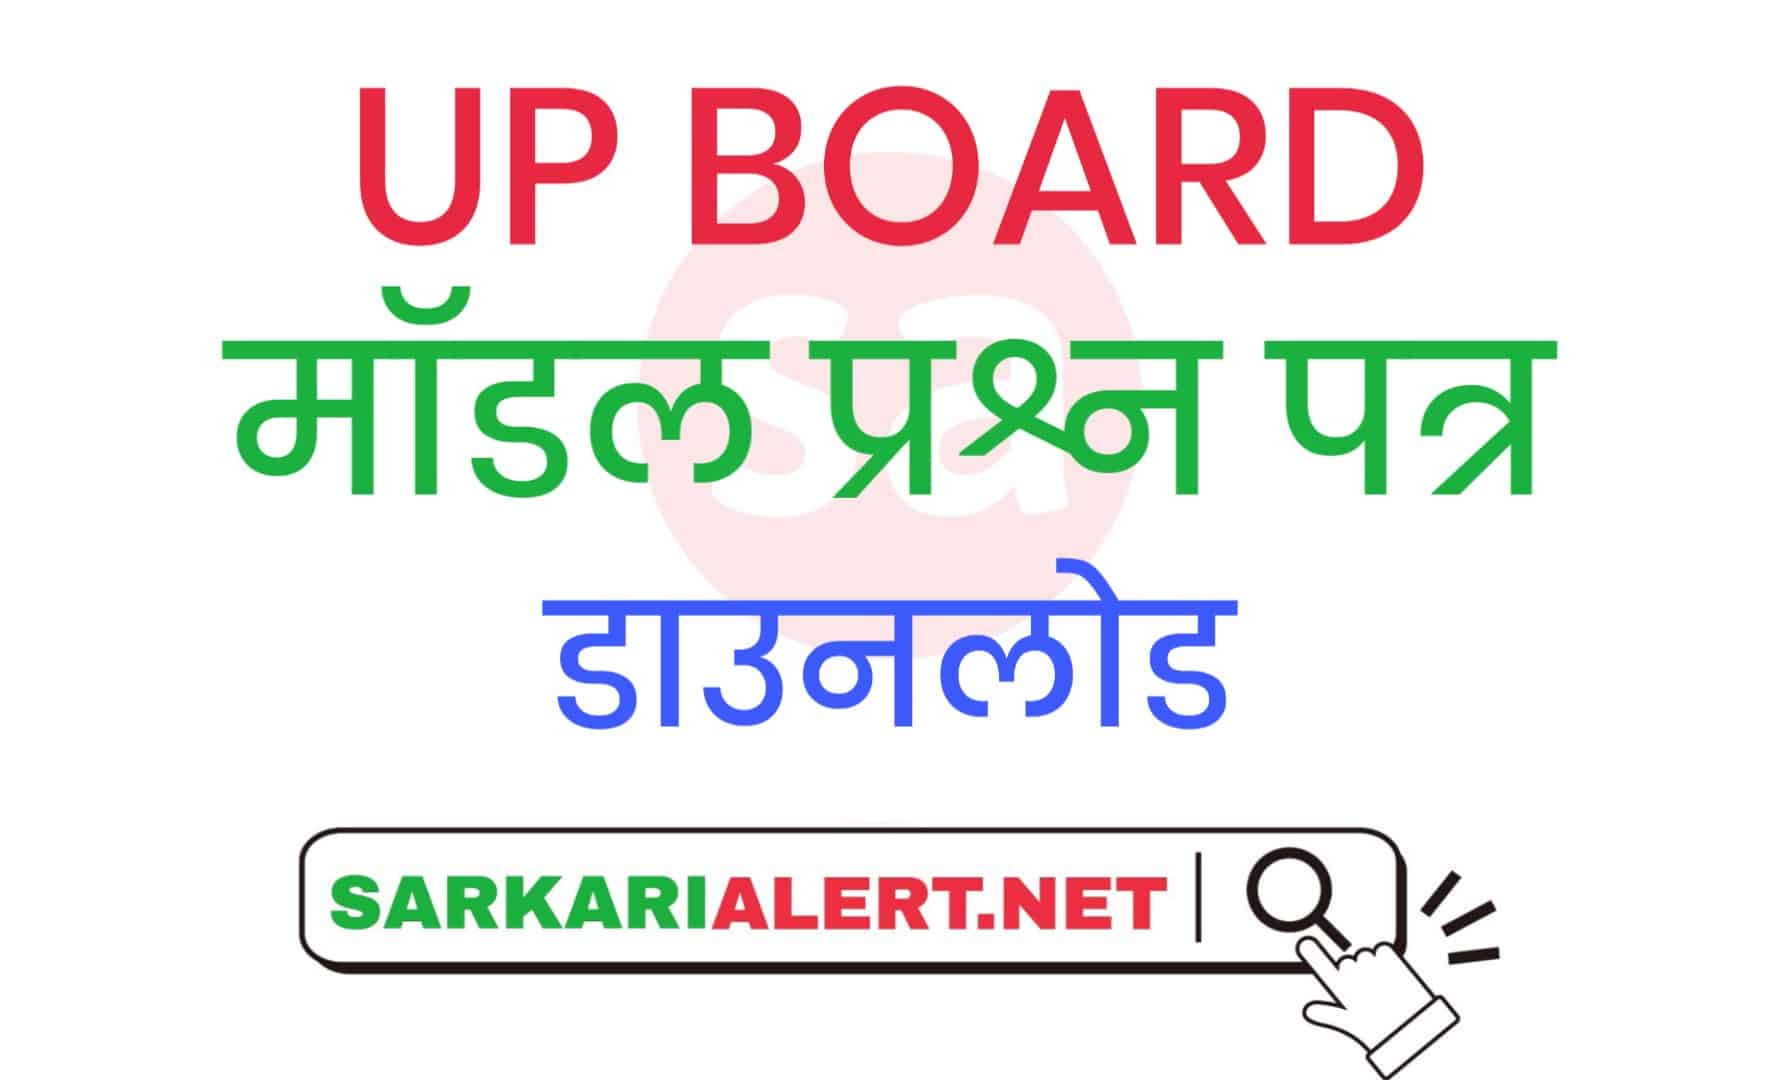 UP Board Model Paper 2021 - Class 10 & 12 UP Board Sample Papers